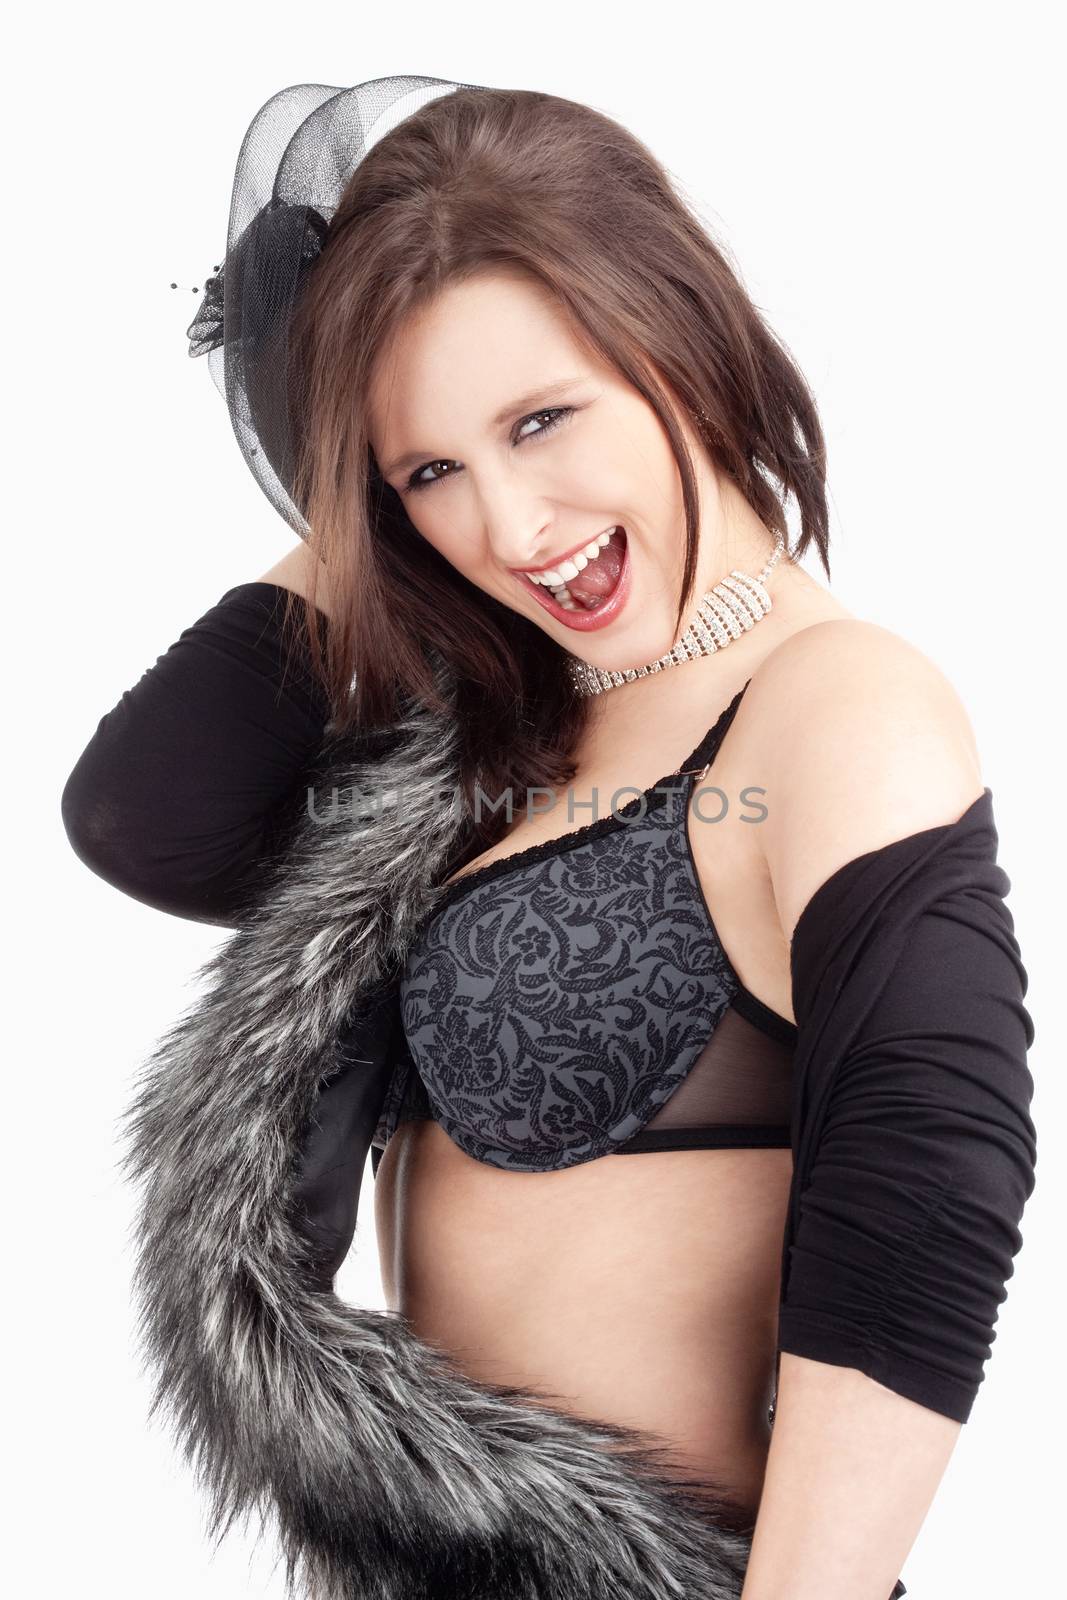 Young Woman with Hat and Fur in her Bra, Smiling - Isolated on White